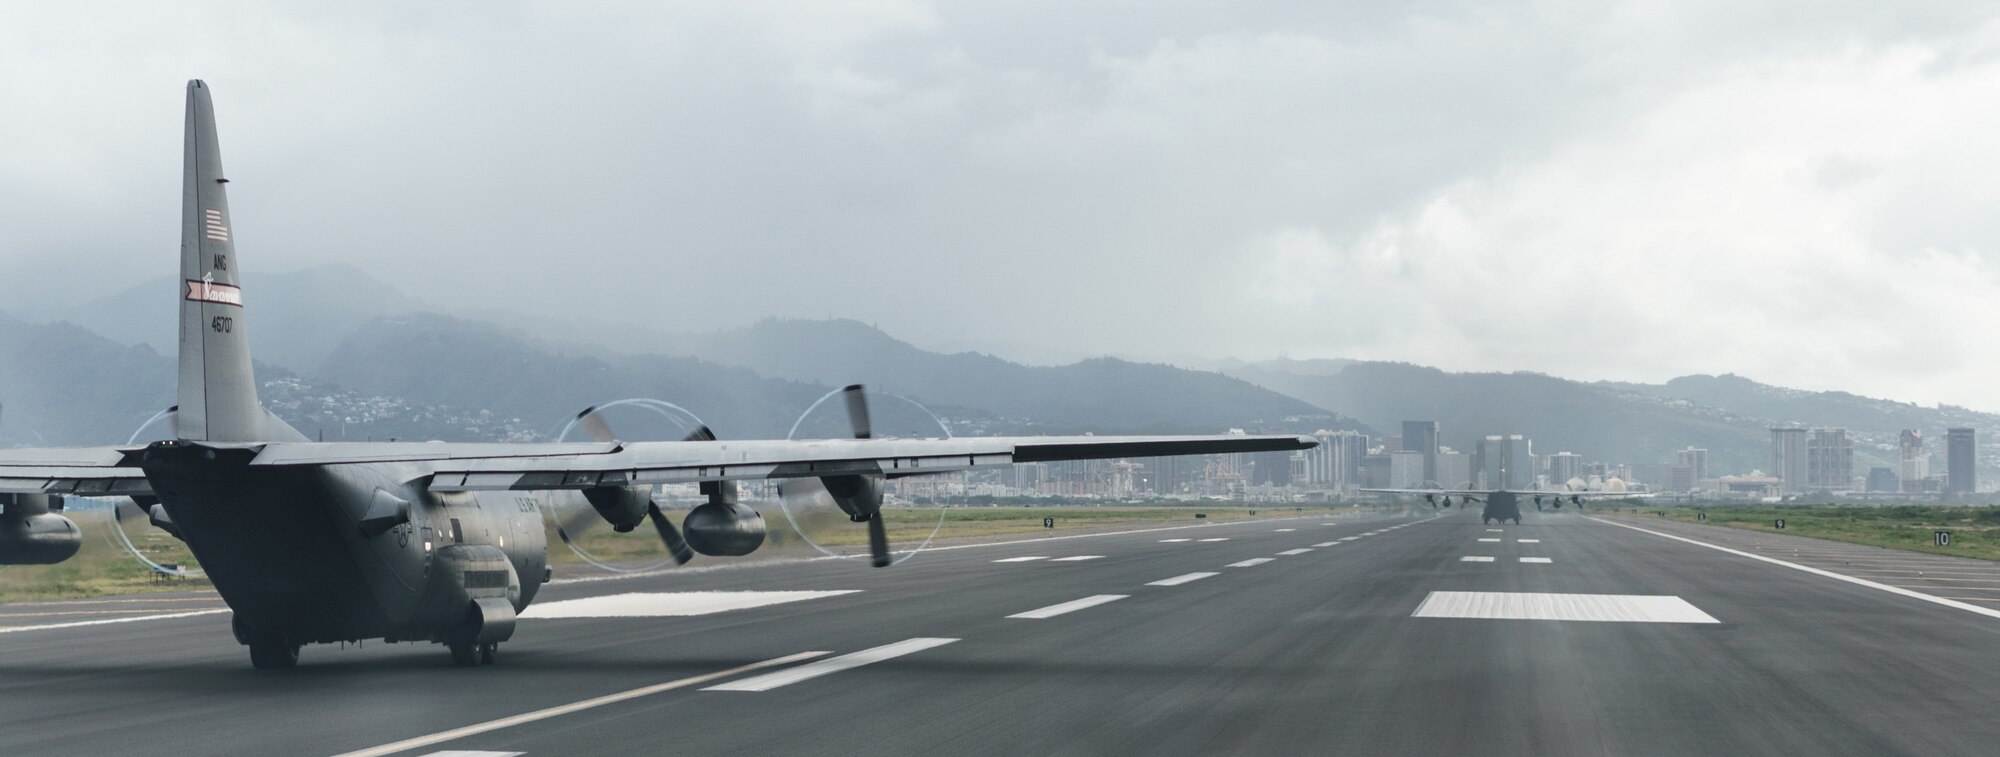 A Georgia Air National Guard C-130 Hercules prepares for take-off at Joint Base Pearl Harbor-Hickam, Hawaii, as part of exercise Sentry Aloha Aug. 23, 2016. The Kentucky Air National Guard and multiple other Air Guard units took part in the exercise, which tested multiple airframes and aircrews in wartime scenarios. (U.S. Air National Guard photo by Senior Airman Robert Buchberger)